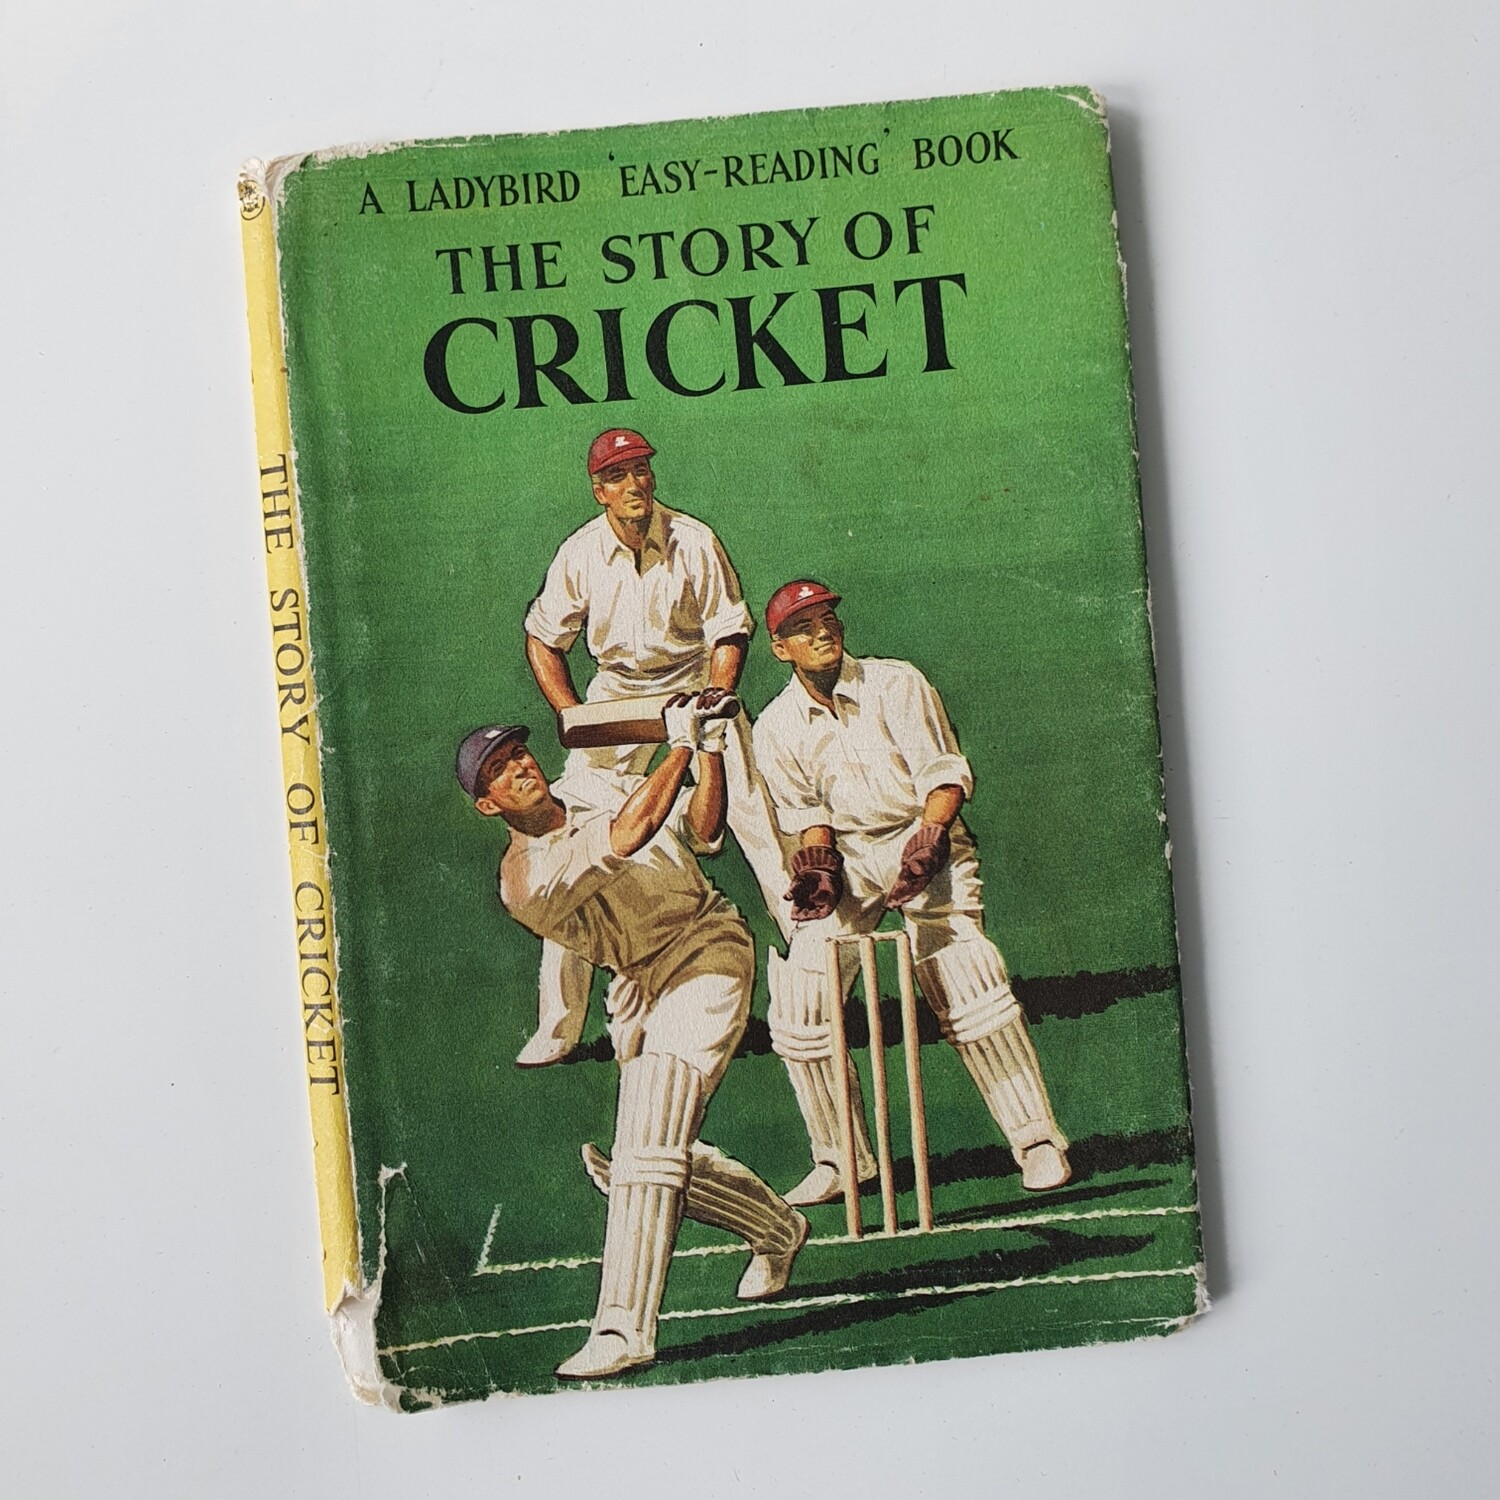 Cricket - made from a Ladybird Book dust jacket - no original book pages